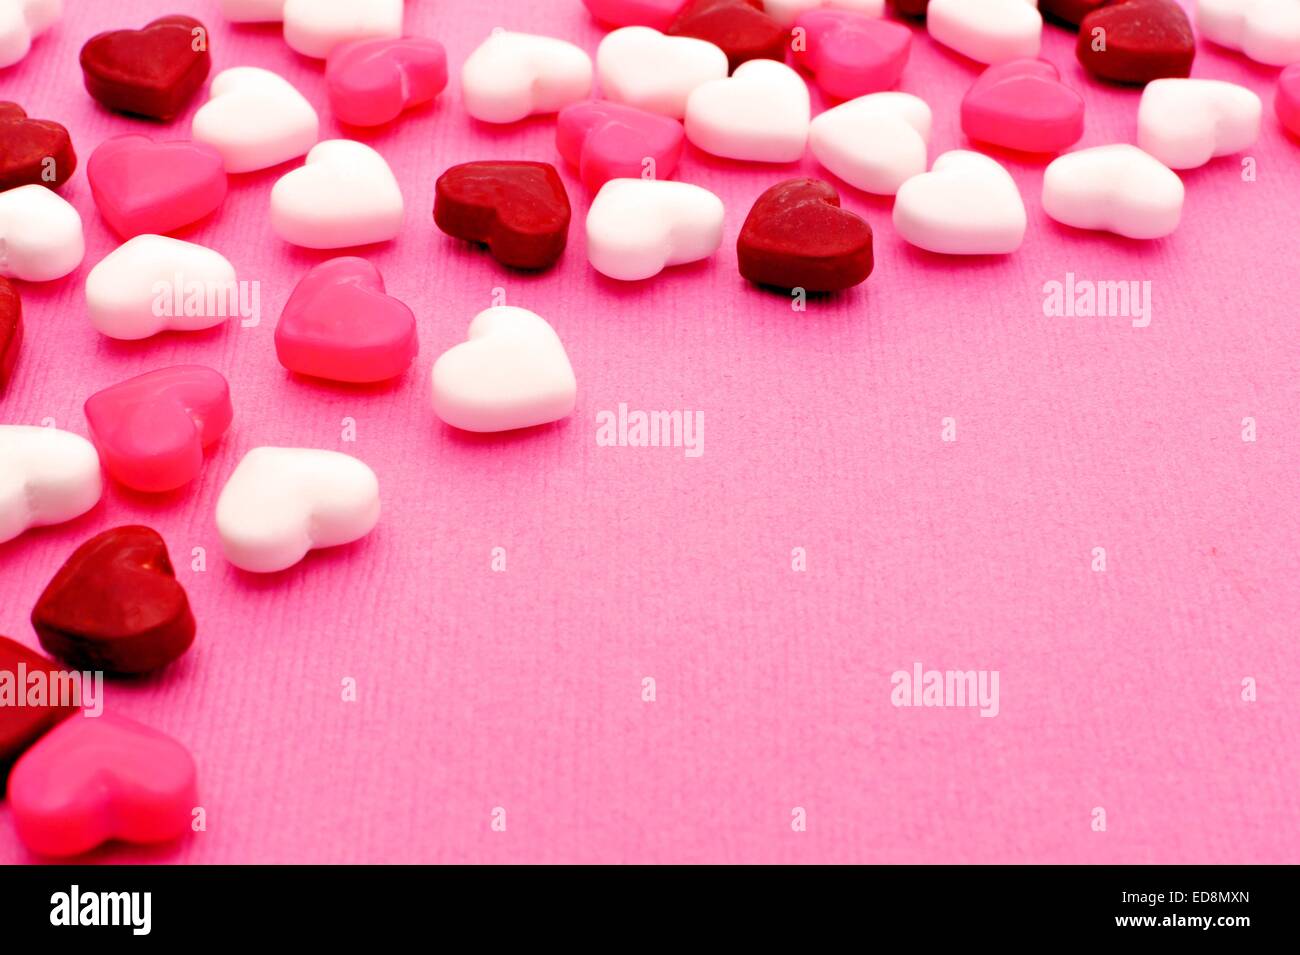 Valentines Day candy forming a border on a pink textured background Stock Photo